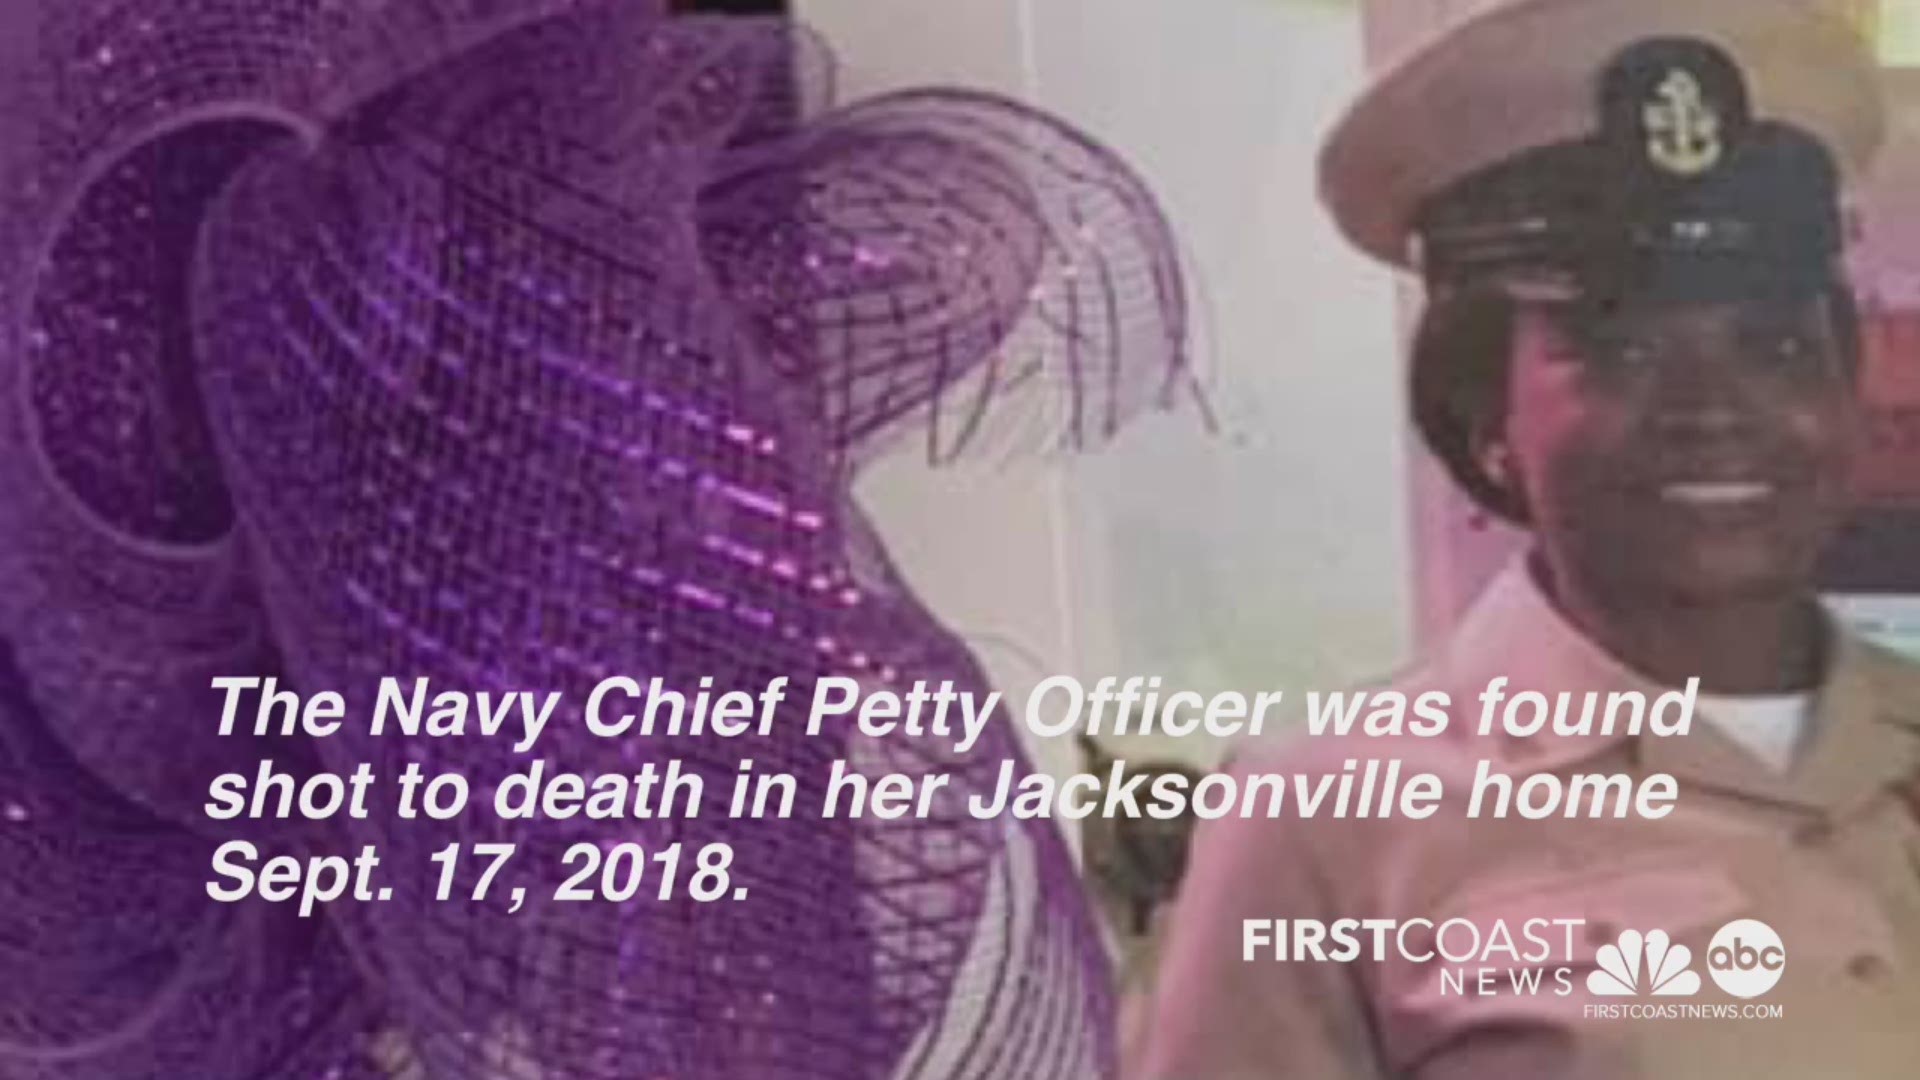 On the one-year anniversary of her shooting death in Jacksonville, shipmates of Navy Petty Officer Andrea Washington remembered her by releasing lighted lanterns in the sky at the beach. Washington's ex-fiance Danny Beard is charged in her death. Her shipmates' message during the ceremony: "We will never forget."